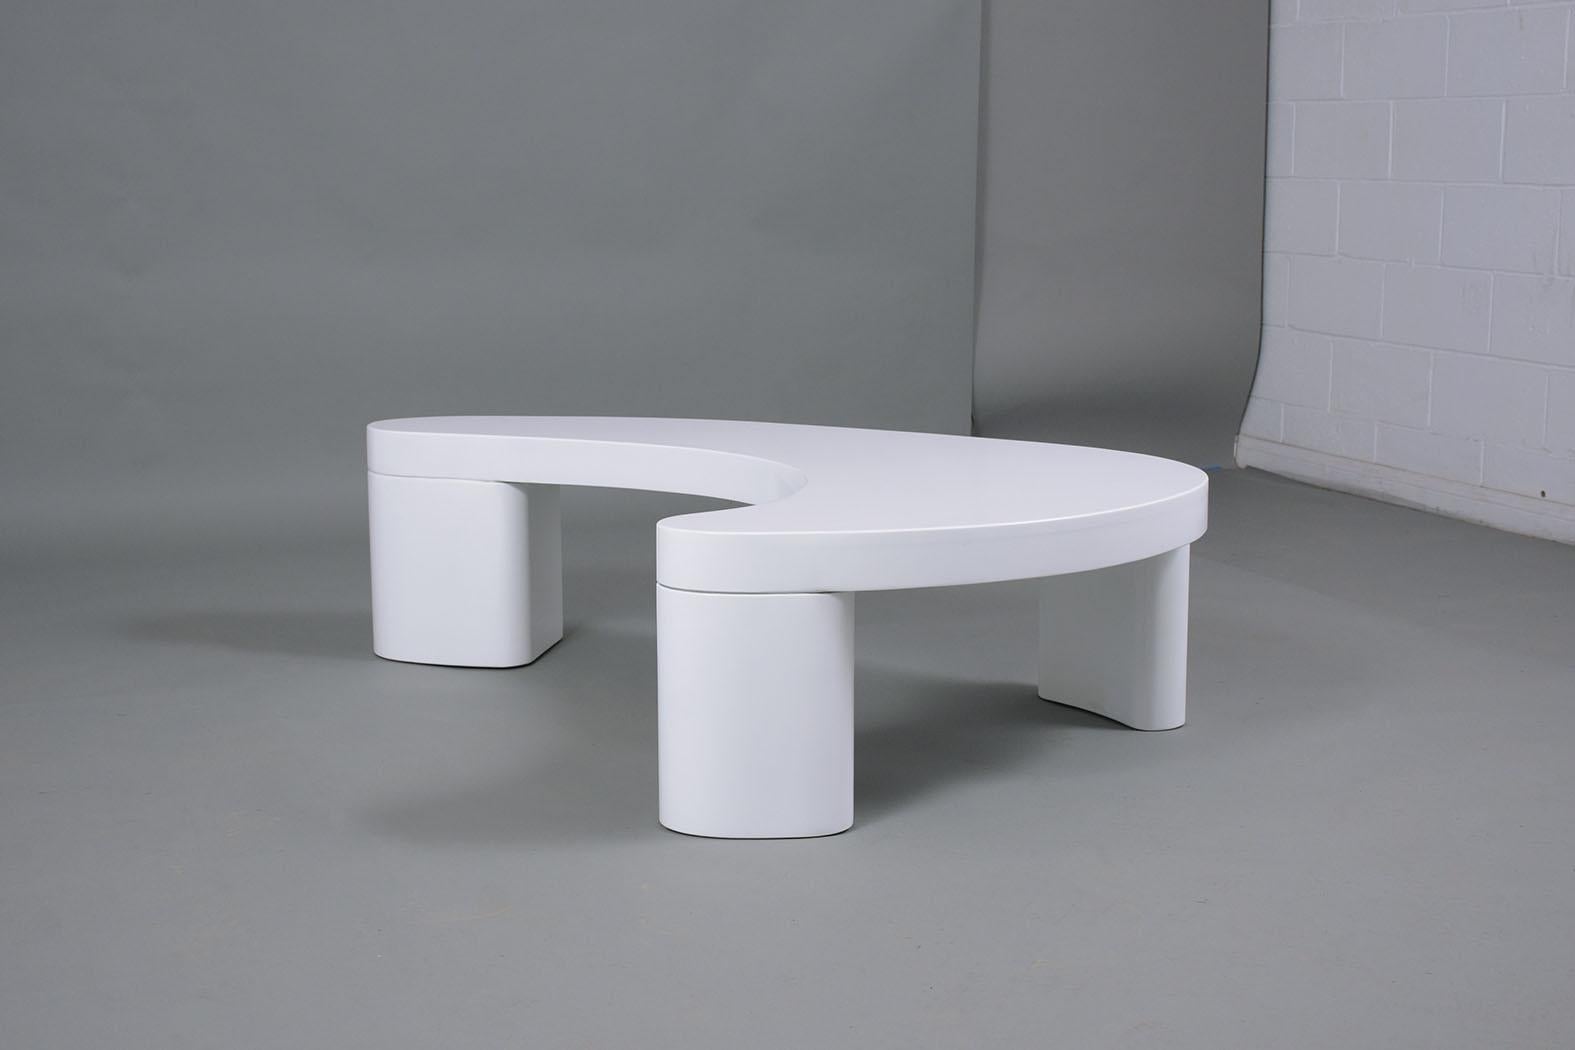 Late 20th Century Mid-Century Modern White Lacquered Coffee Table